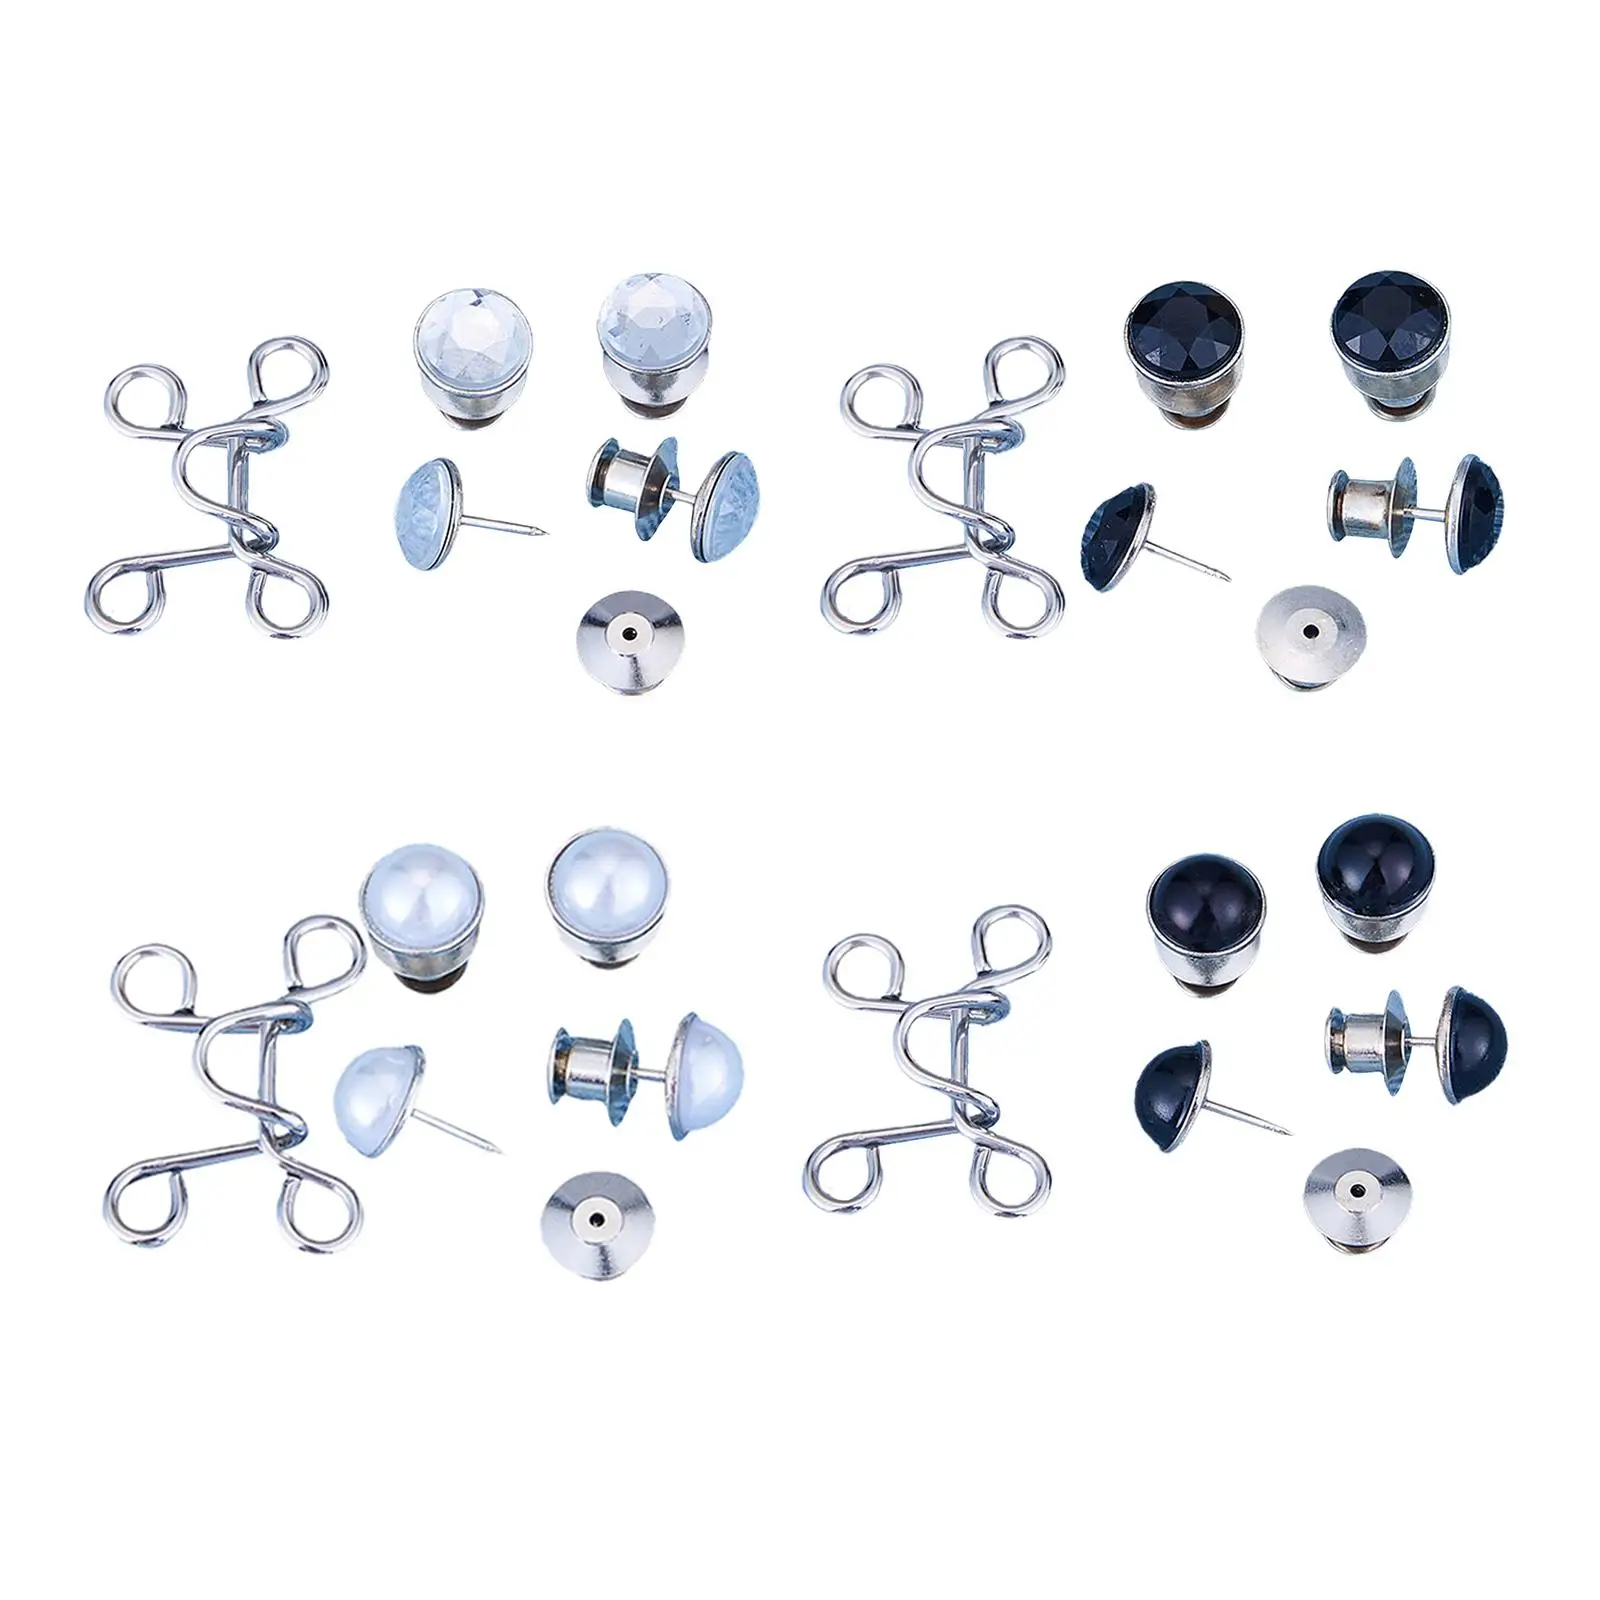 Sewing Hooks and Eyes Closure Metal Crafts Buttons  Clothing Bra Pants Jean Adjustable Waist Buckle Coats Craft Crafting 